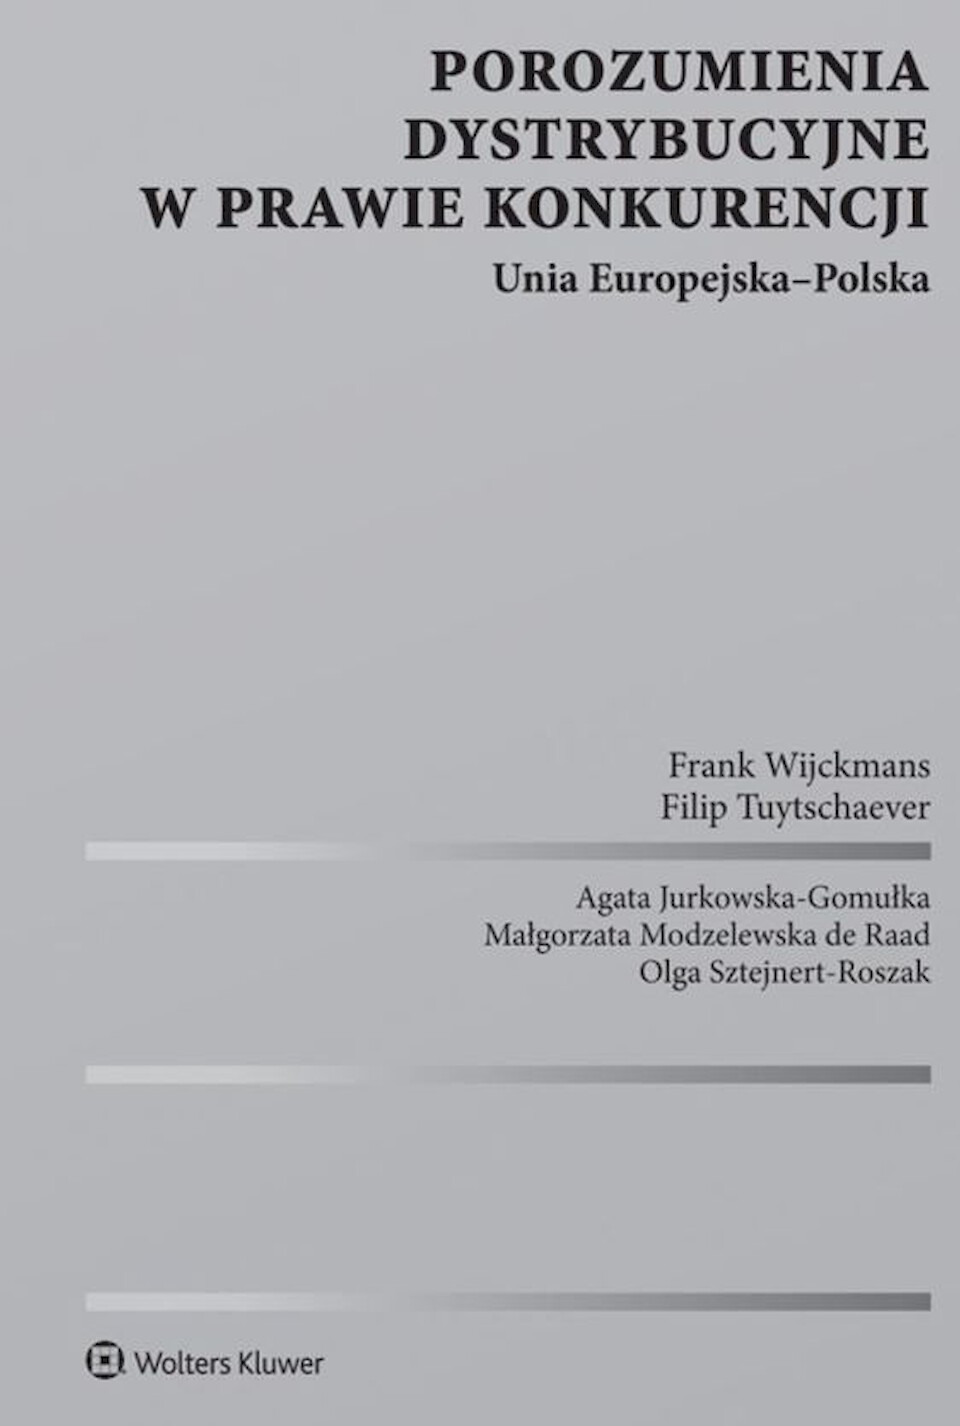 Vertical agreements in competition law. European Union-Poland